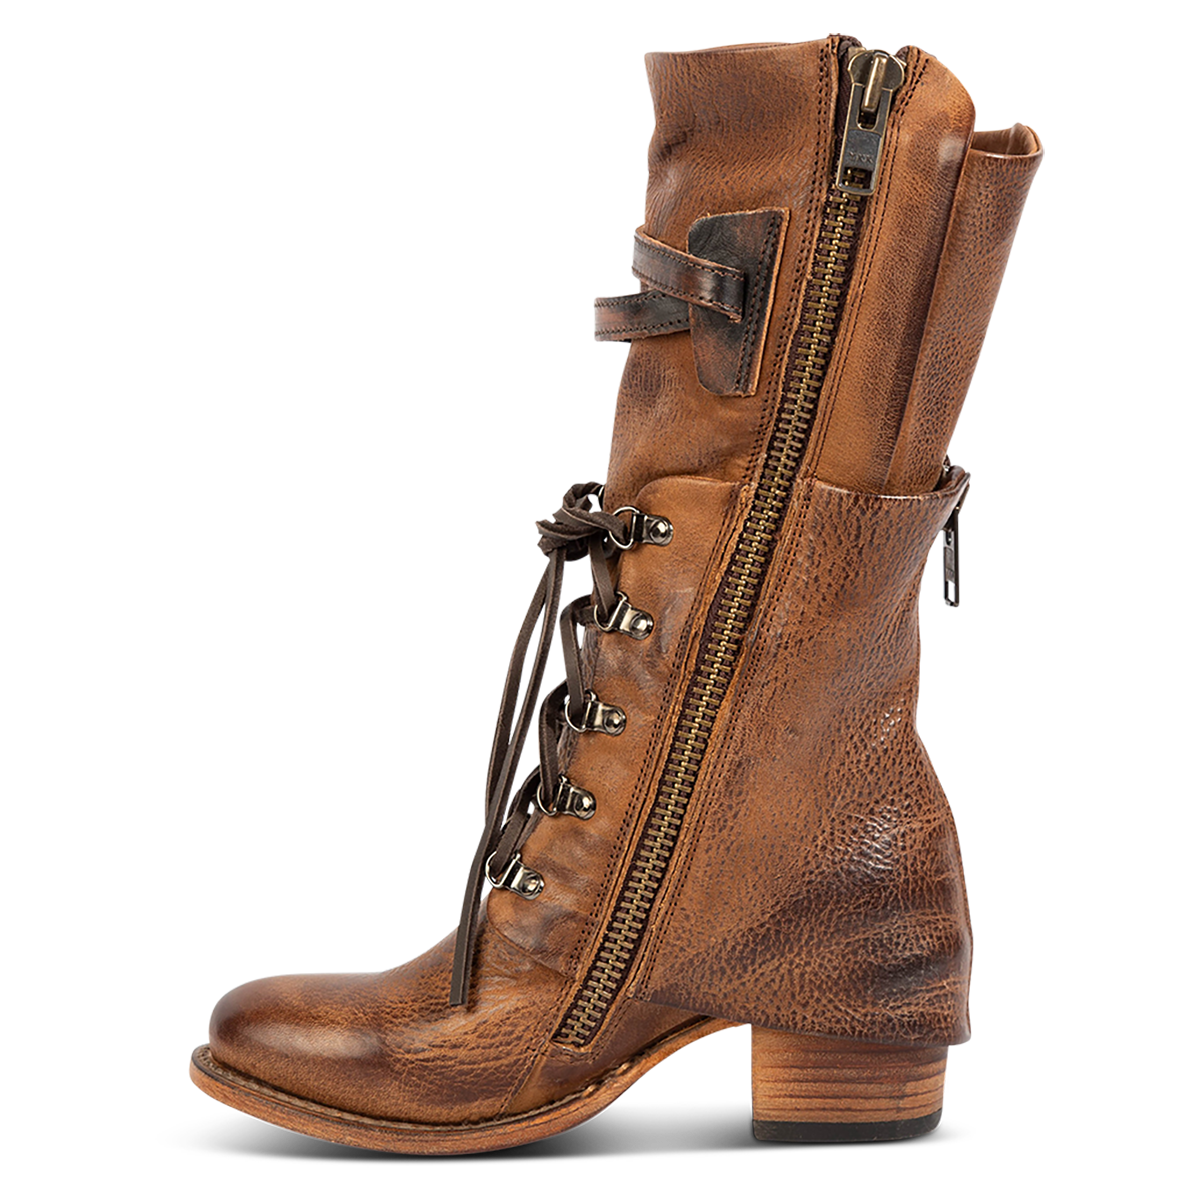 Inside view showing a full inside working brass zipper, stacked heel and leather shaft overlay on FREEBIRD women's Caboose tan leather boot